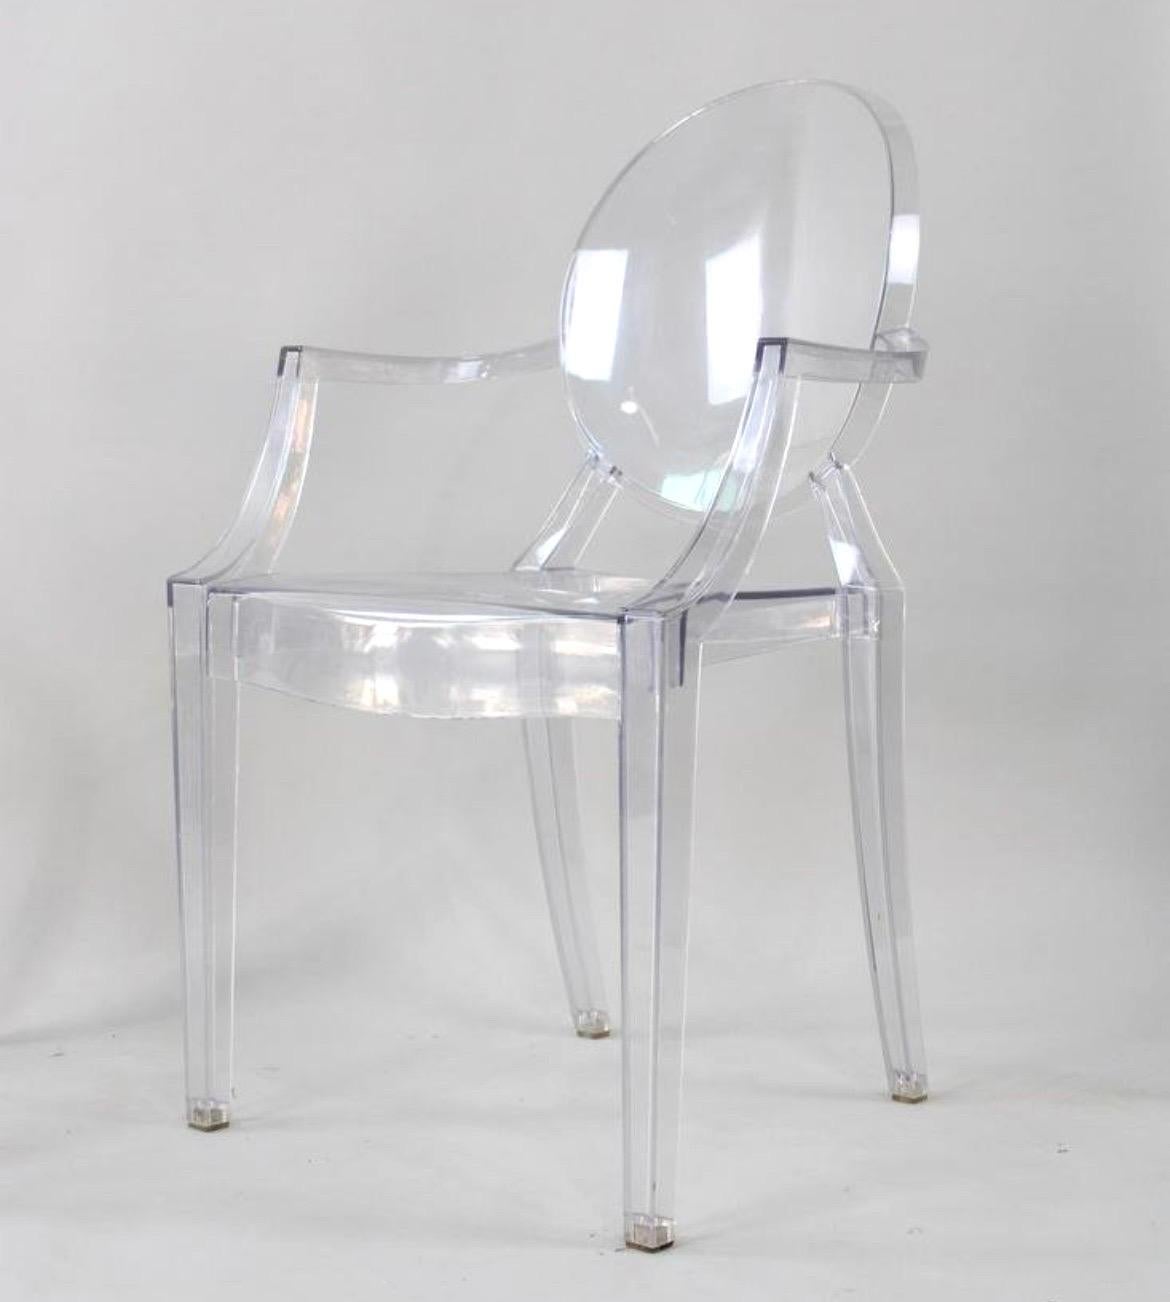 Set of 6 fantastic post modern, clear acrylic ghost chairs. They have curved armrests and straight front legs and saber back legs. Seat back is a circle. They stack easily.
Modern take of the classic Louis XVI armchair.
Suitable for indoor or